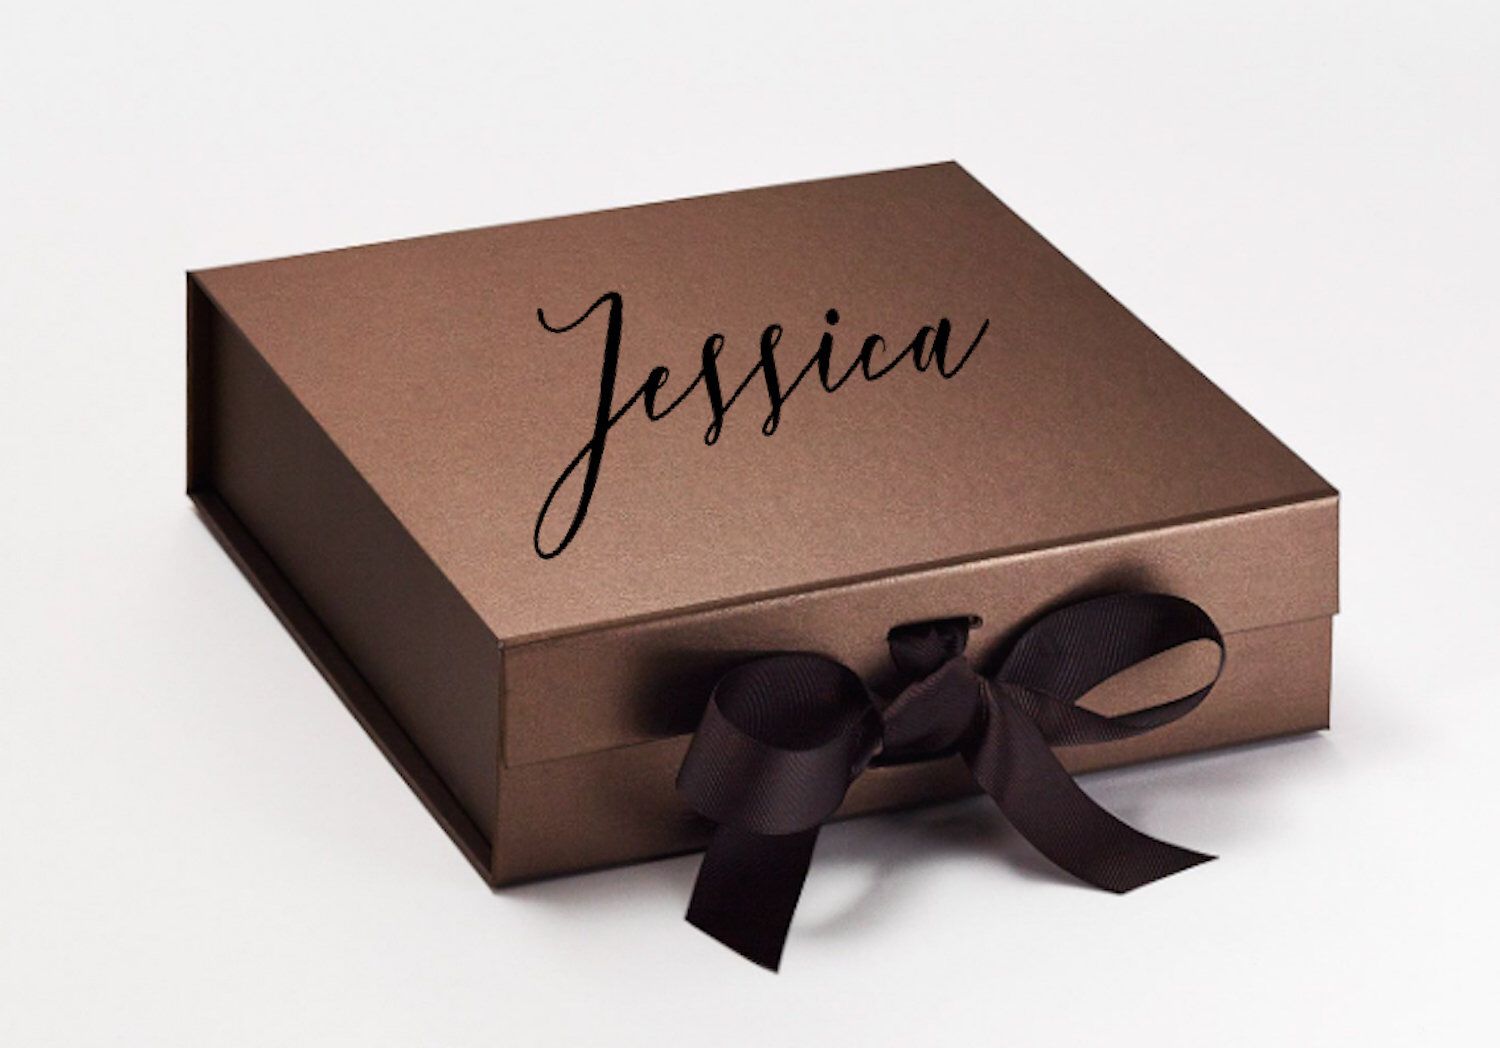 custom gift boxes with logo